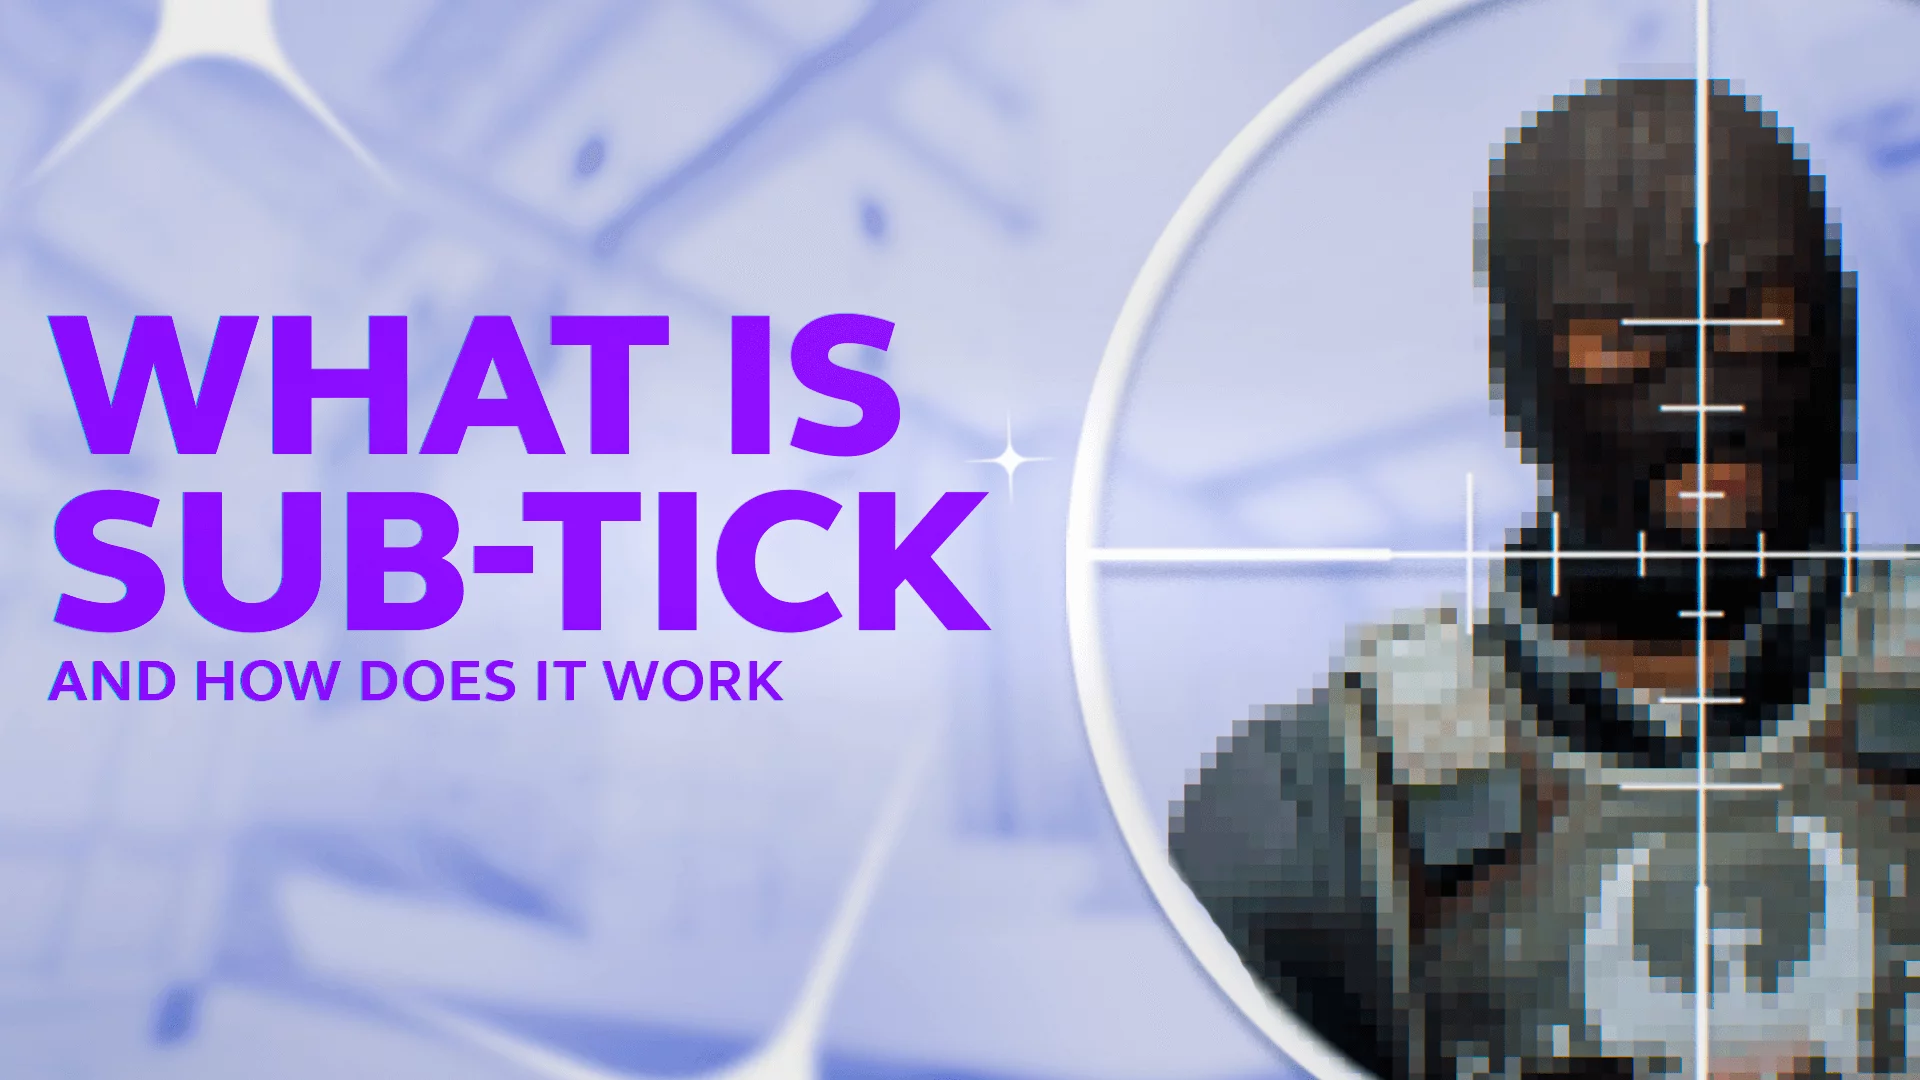 What is sub-tick